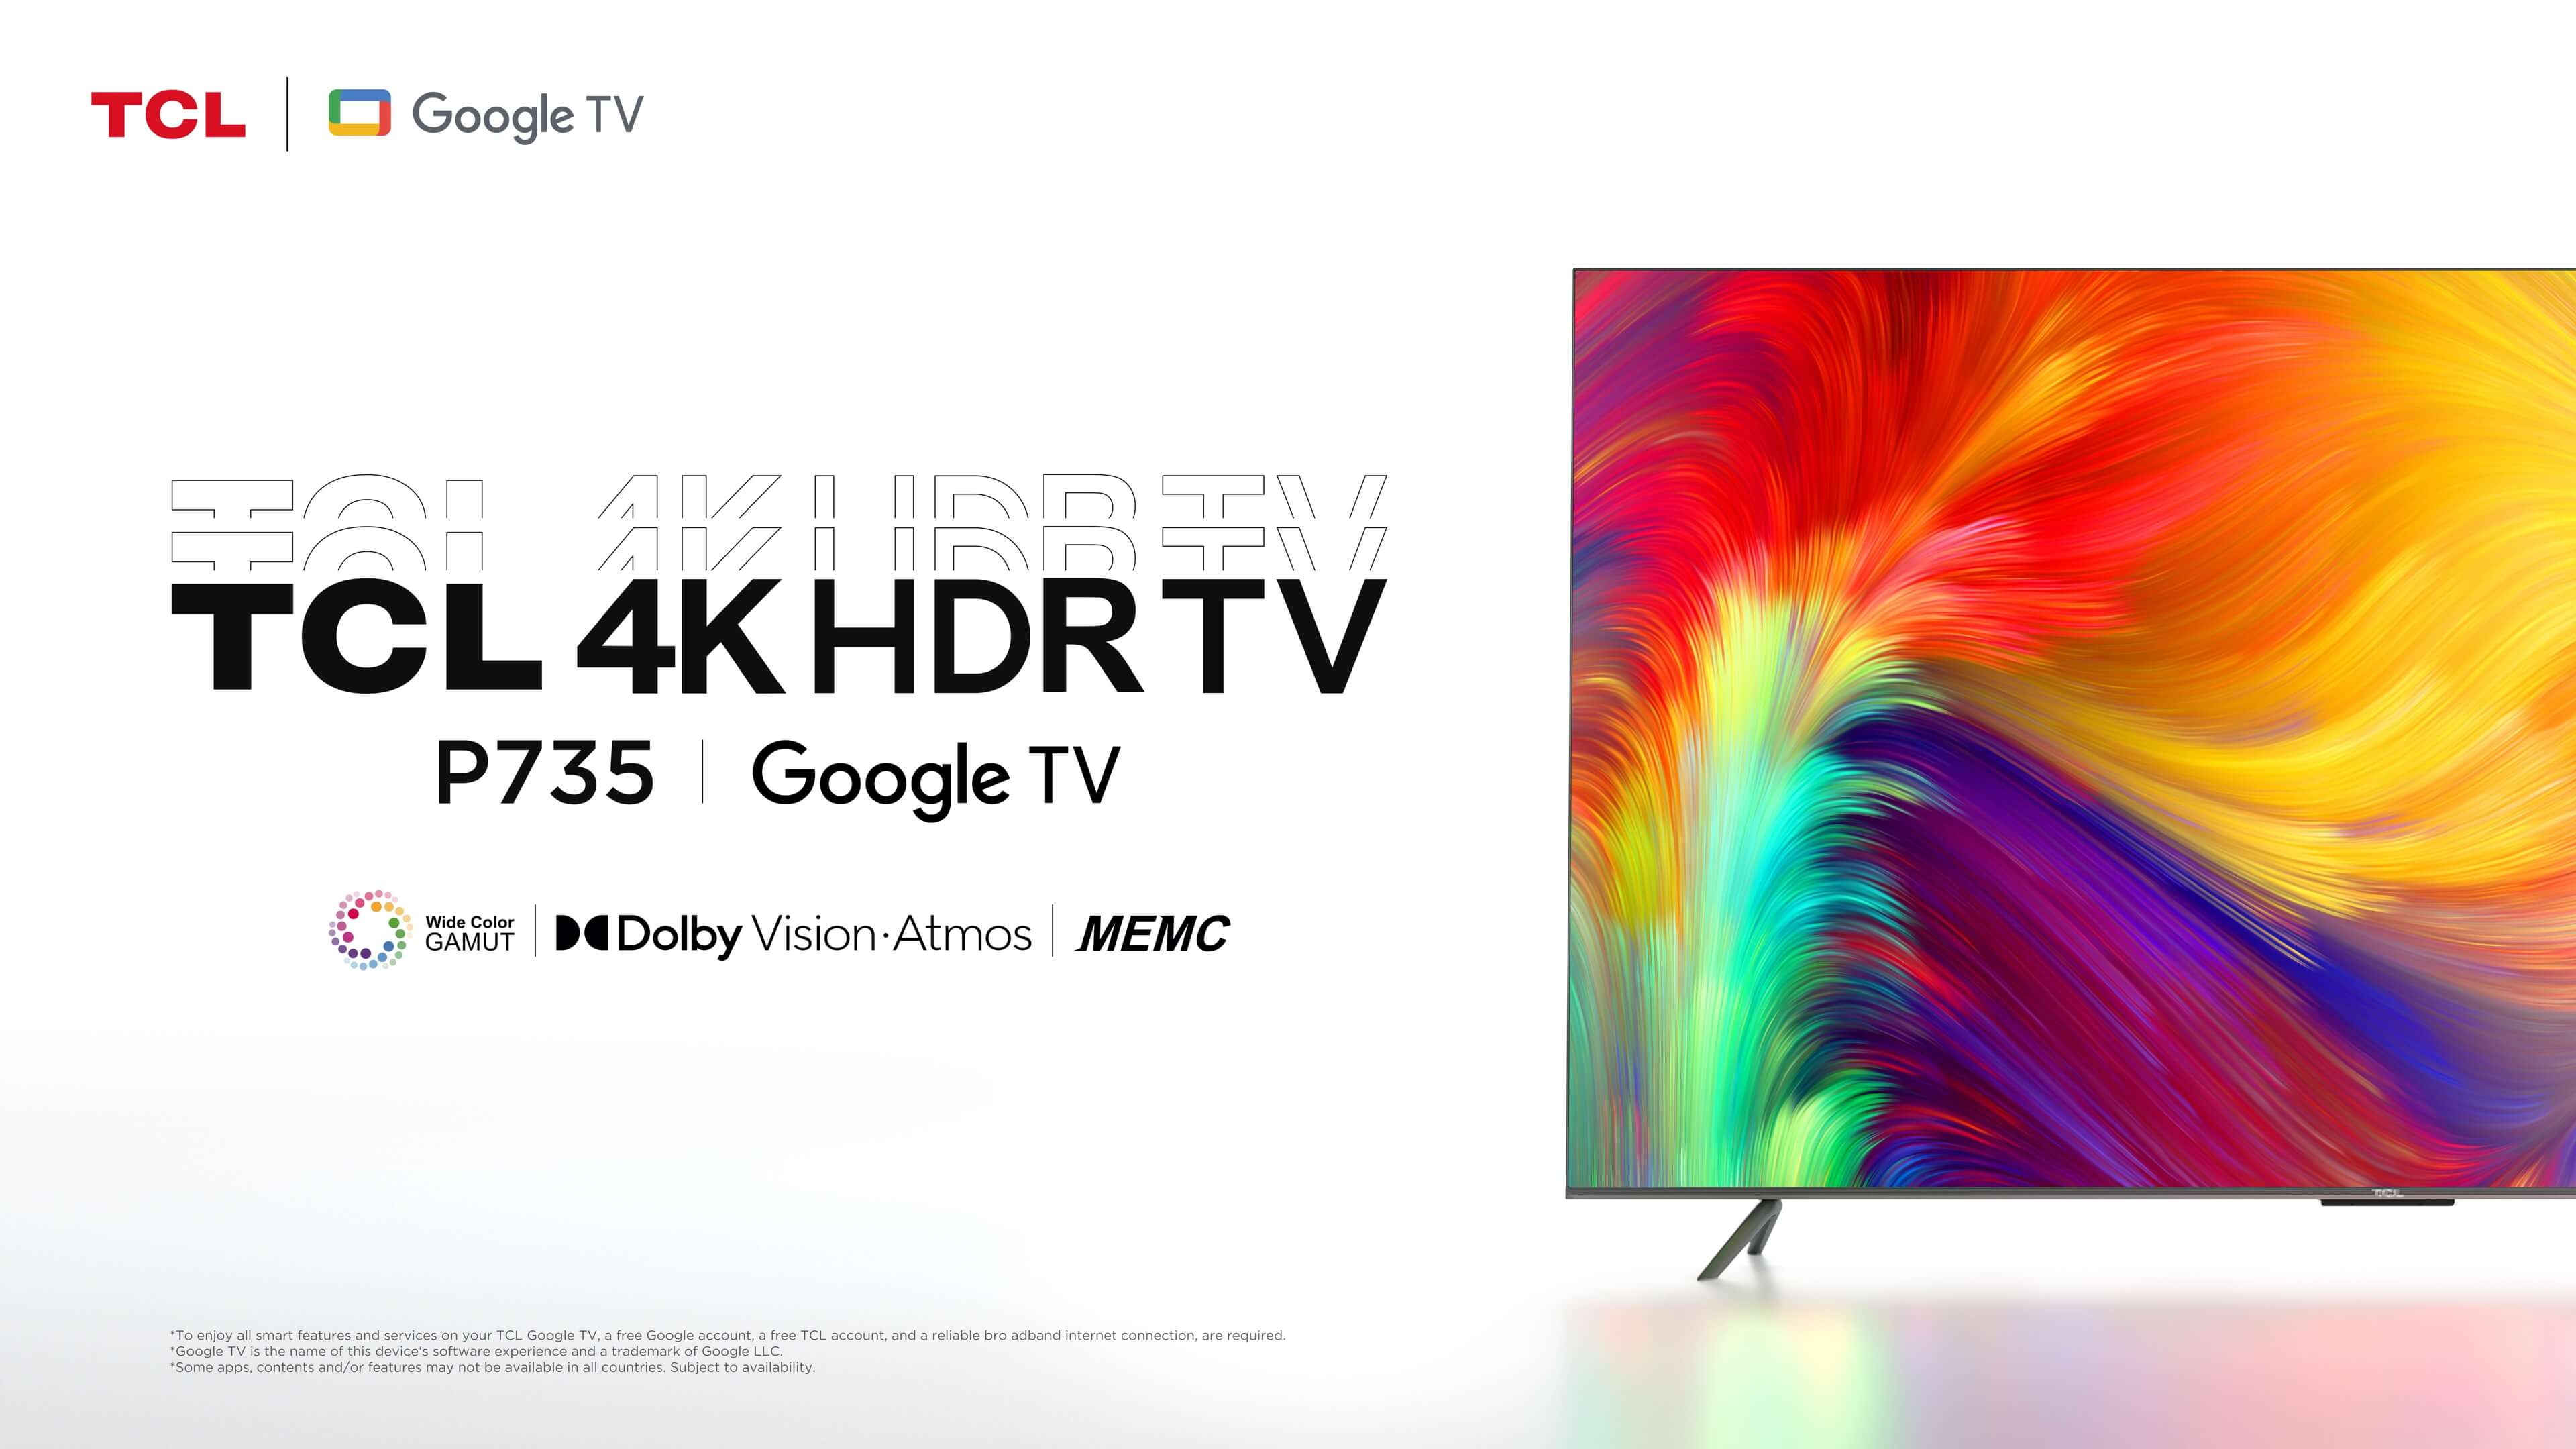 TCL P735 HDR TV